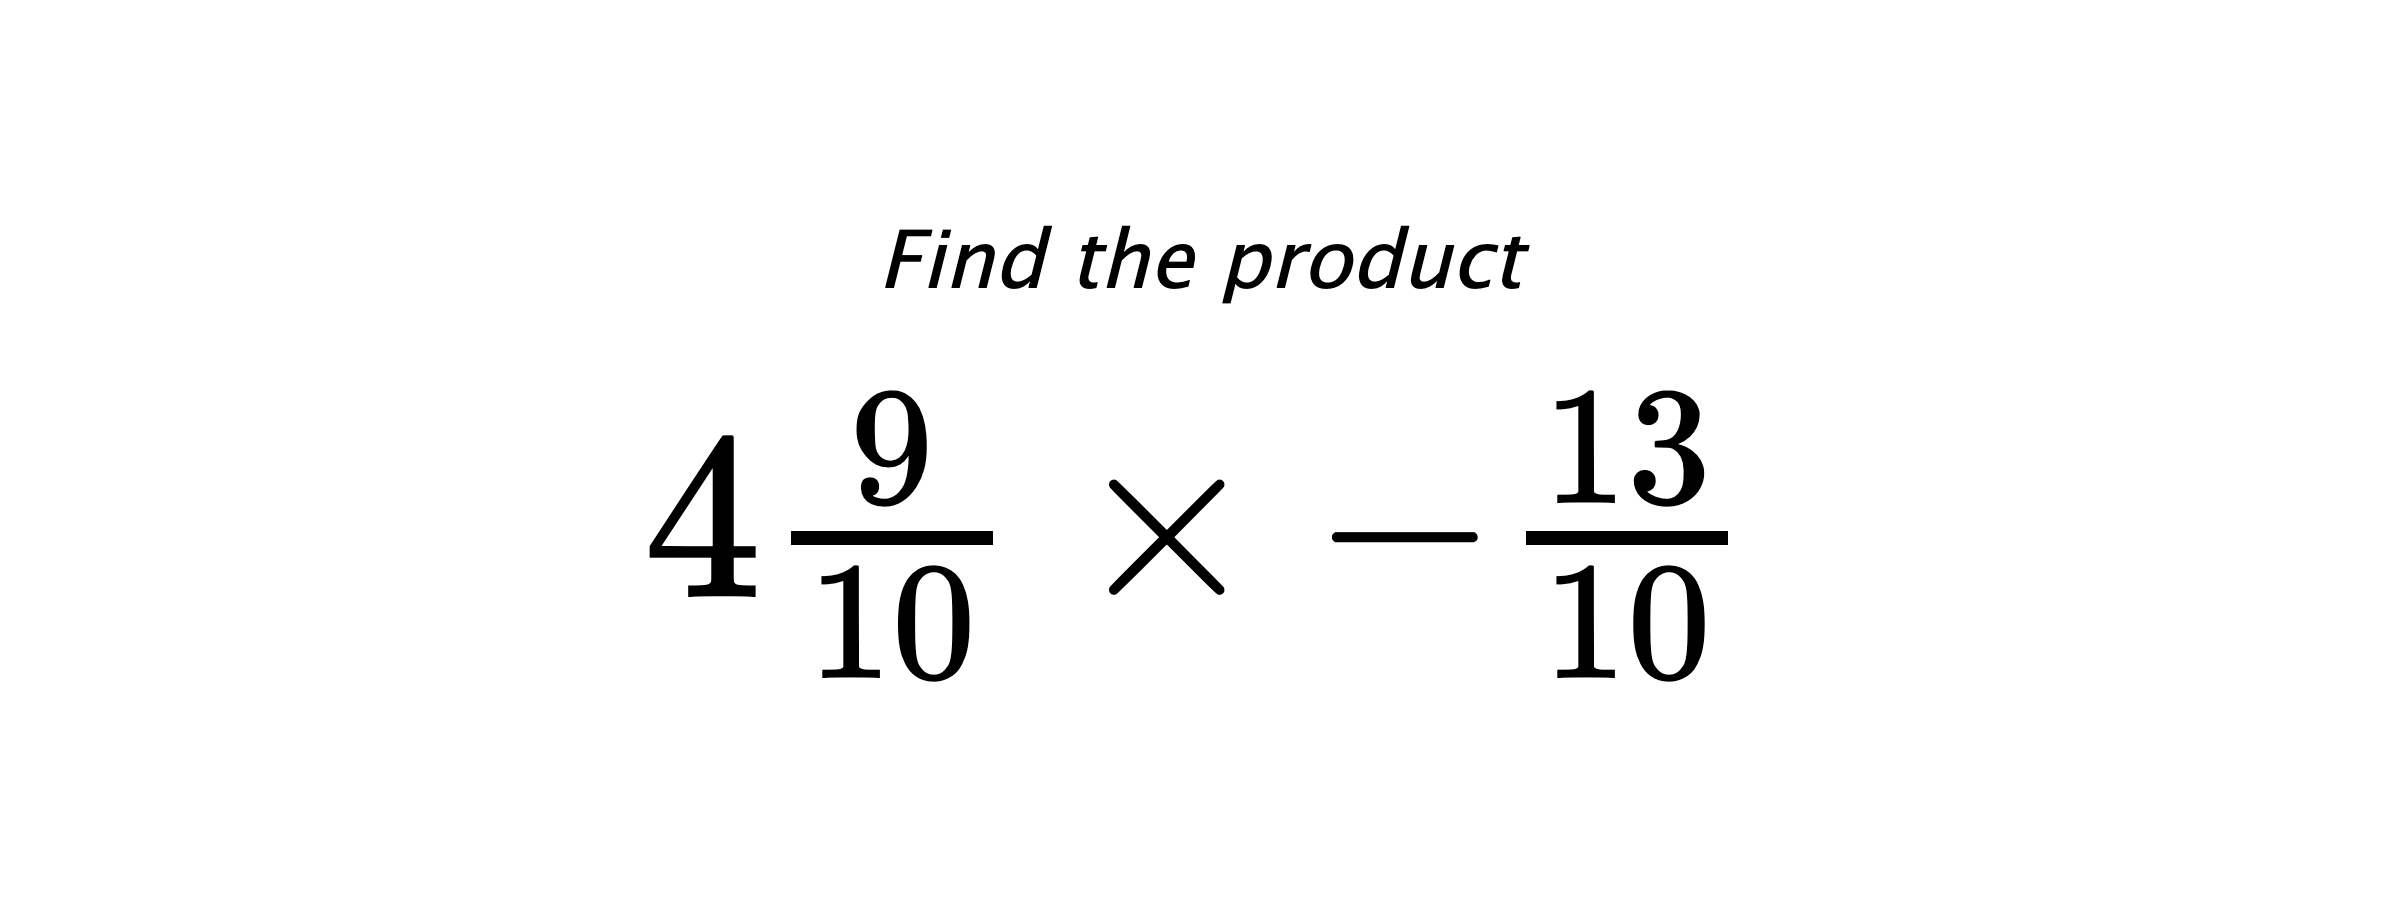 Find the product $ 4\frac{9}{10} \times -\frac{13}{10} $